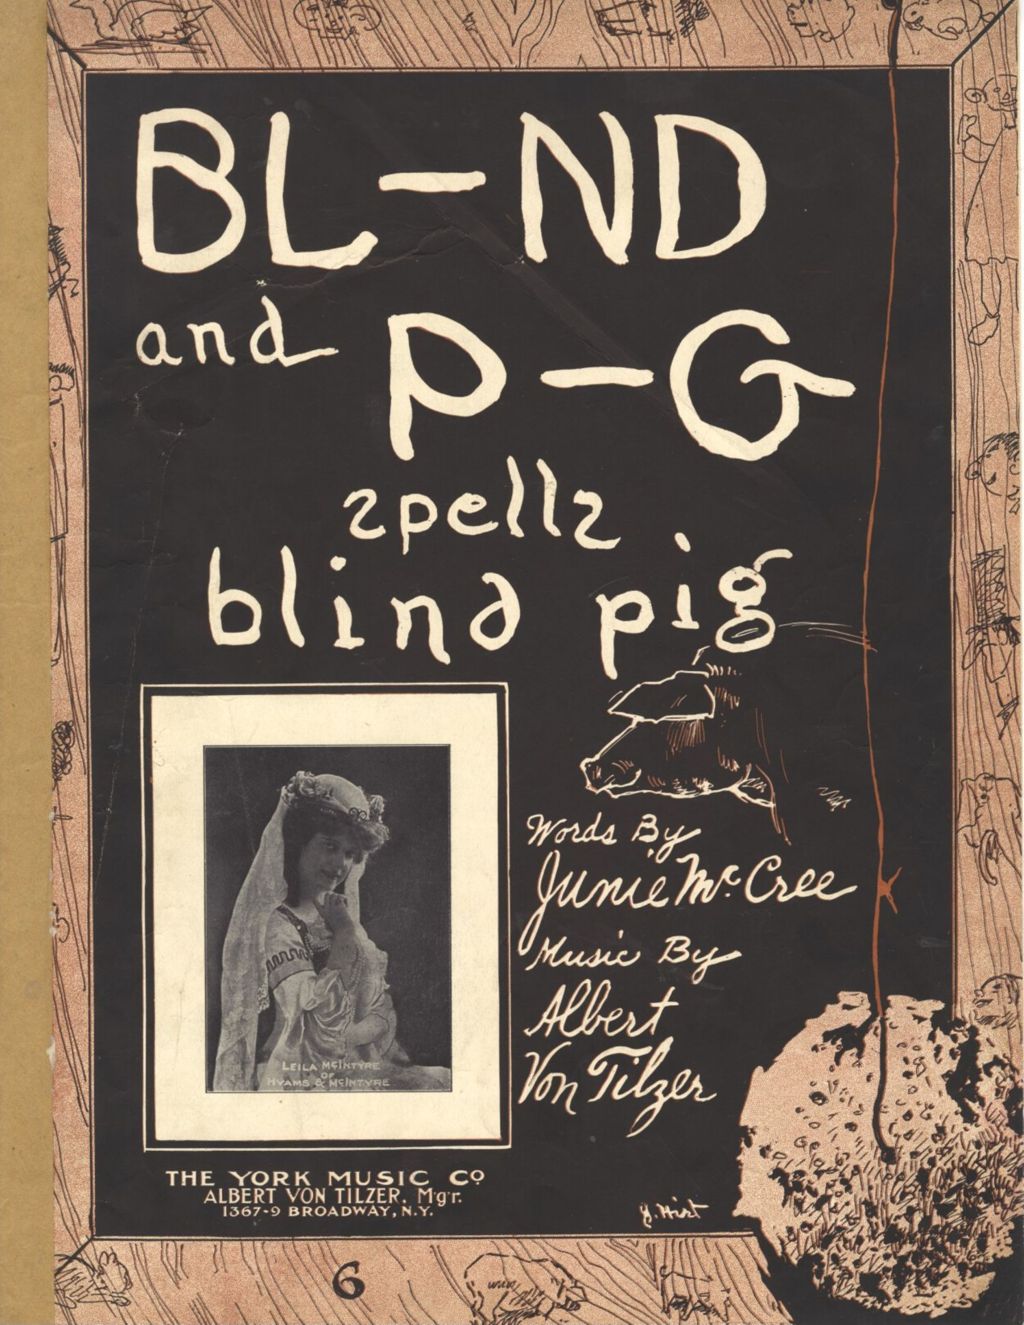 BL-ND and P-G Spells Blind Pig